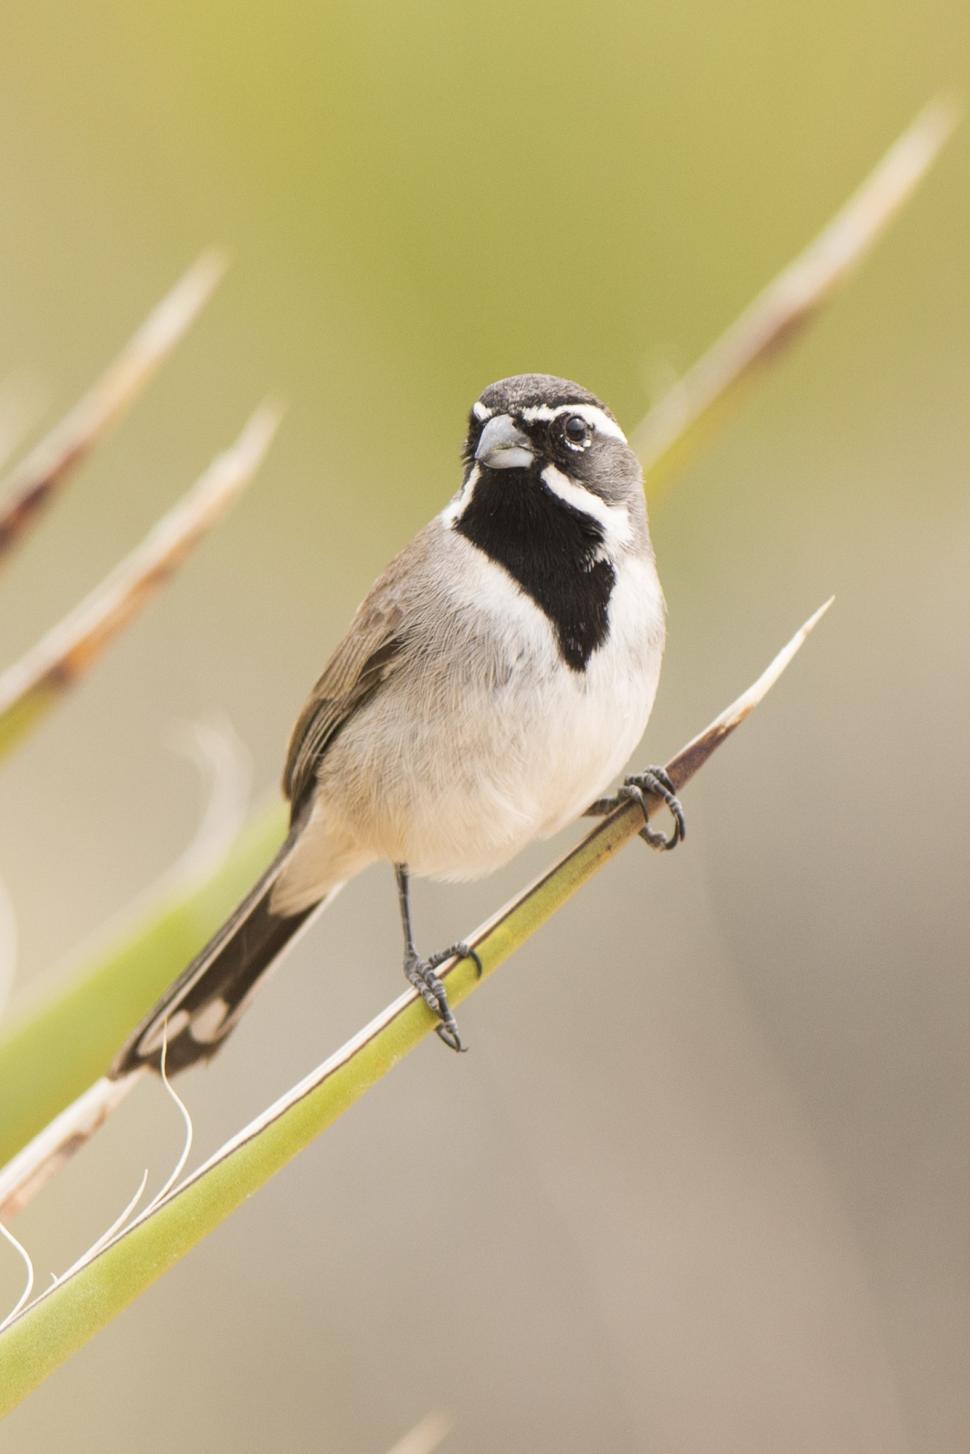 Free Image of Small Bird Perched on Thin Branch 